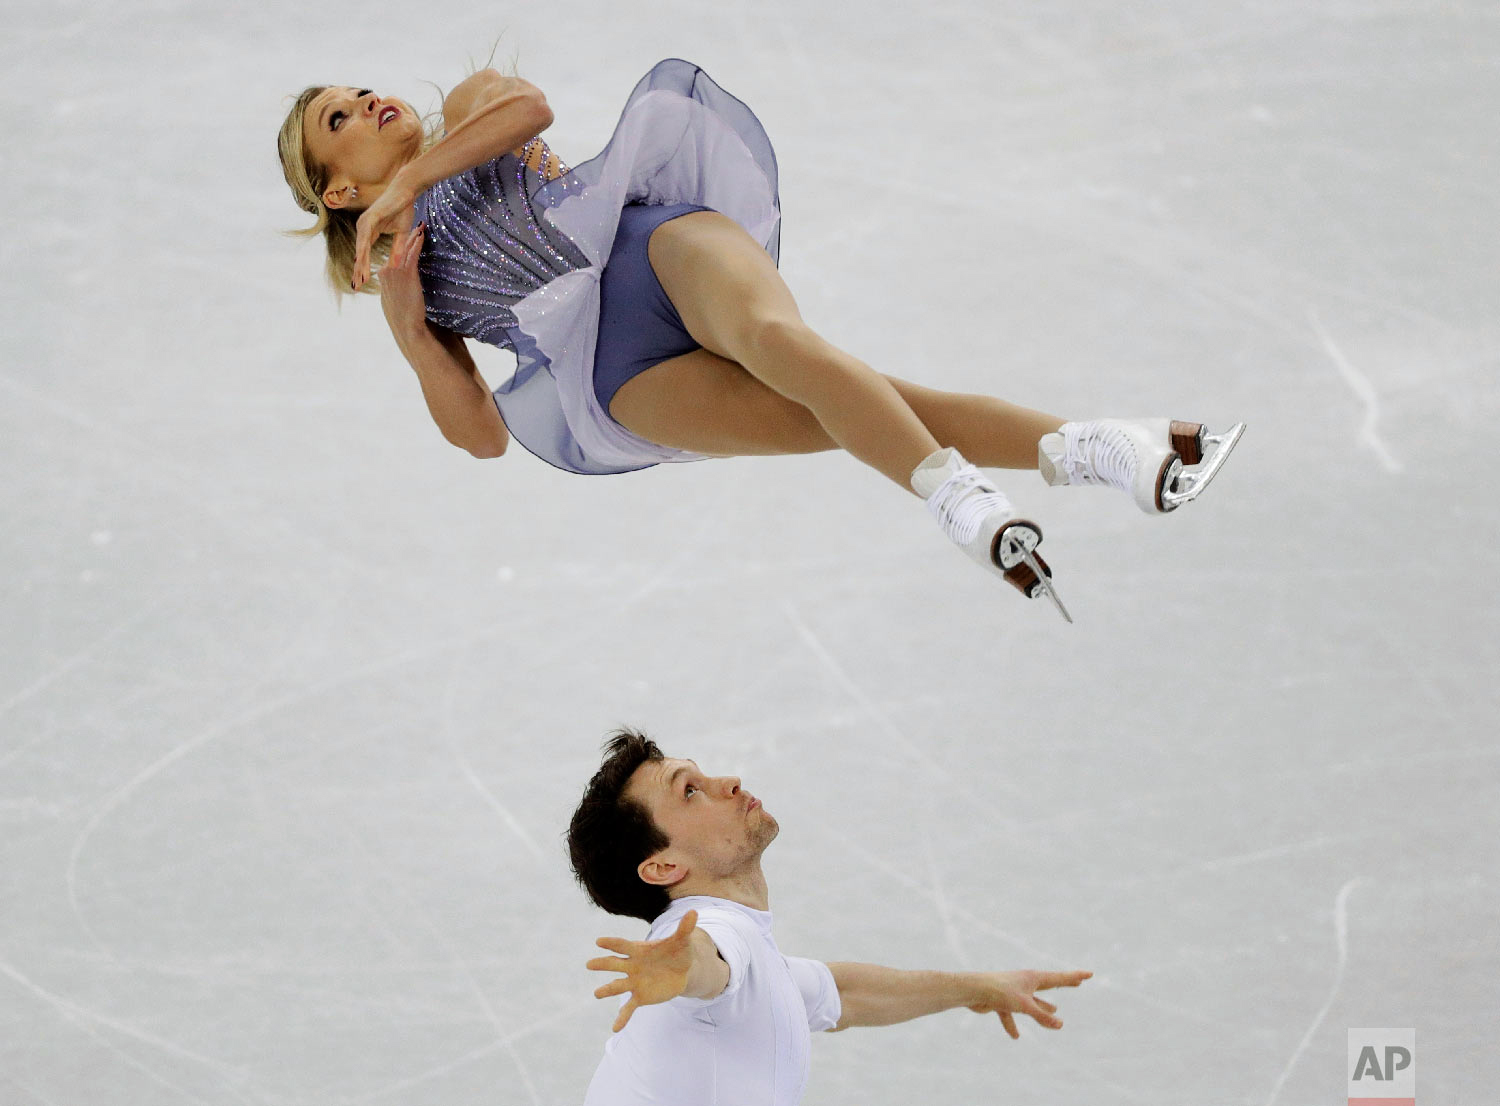  Kirsten Moore-Towers and Michael Marinaro, of Canada, perform in the pairs free skate figure skating final in the Gangneung Ice Arena at the 2018 Winter Olympics in Gangneung, South Korea, Thursday, Feb. 15, 2018. (AP Photo/David J. Phillip) 